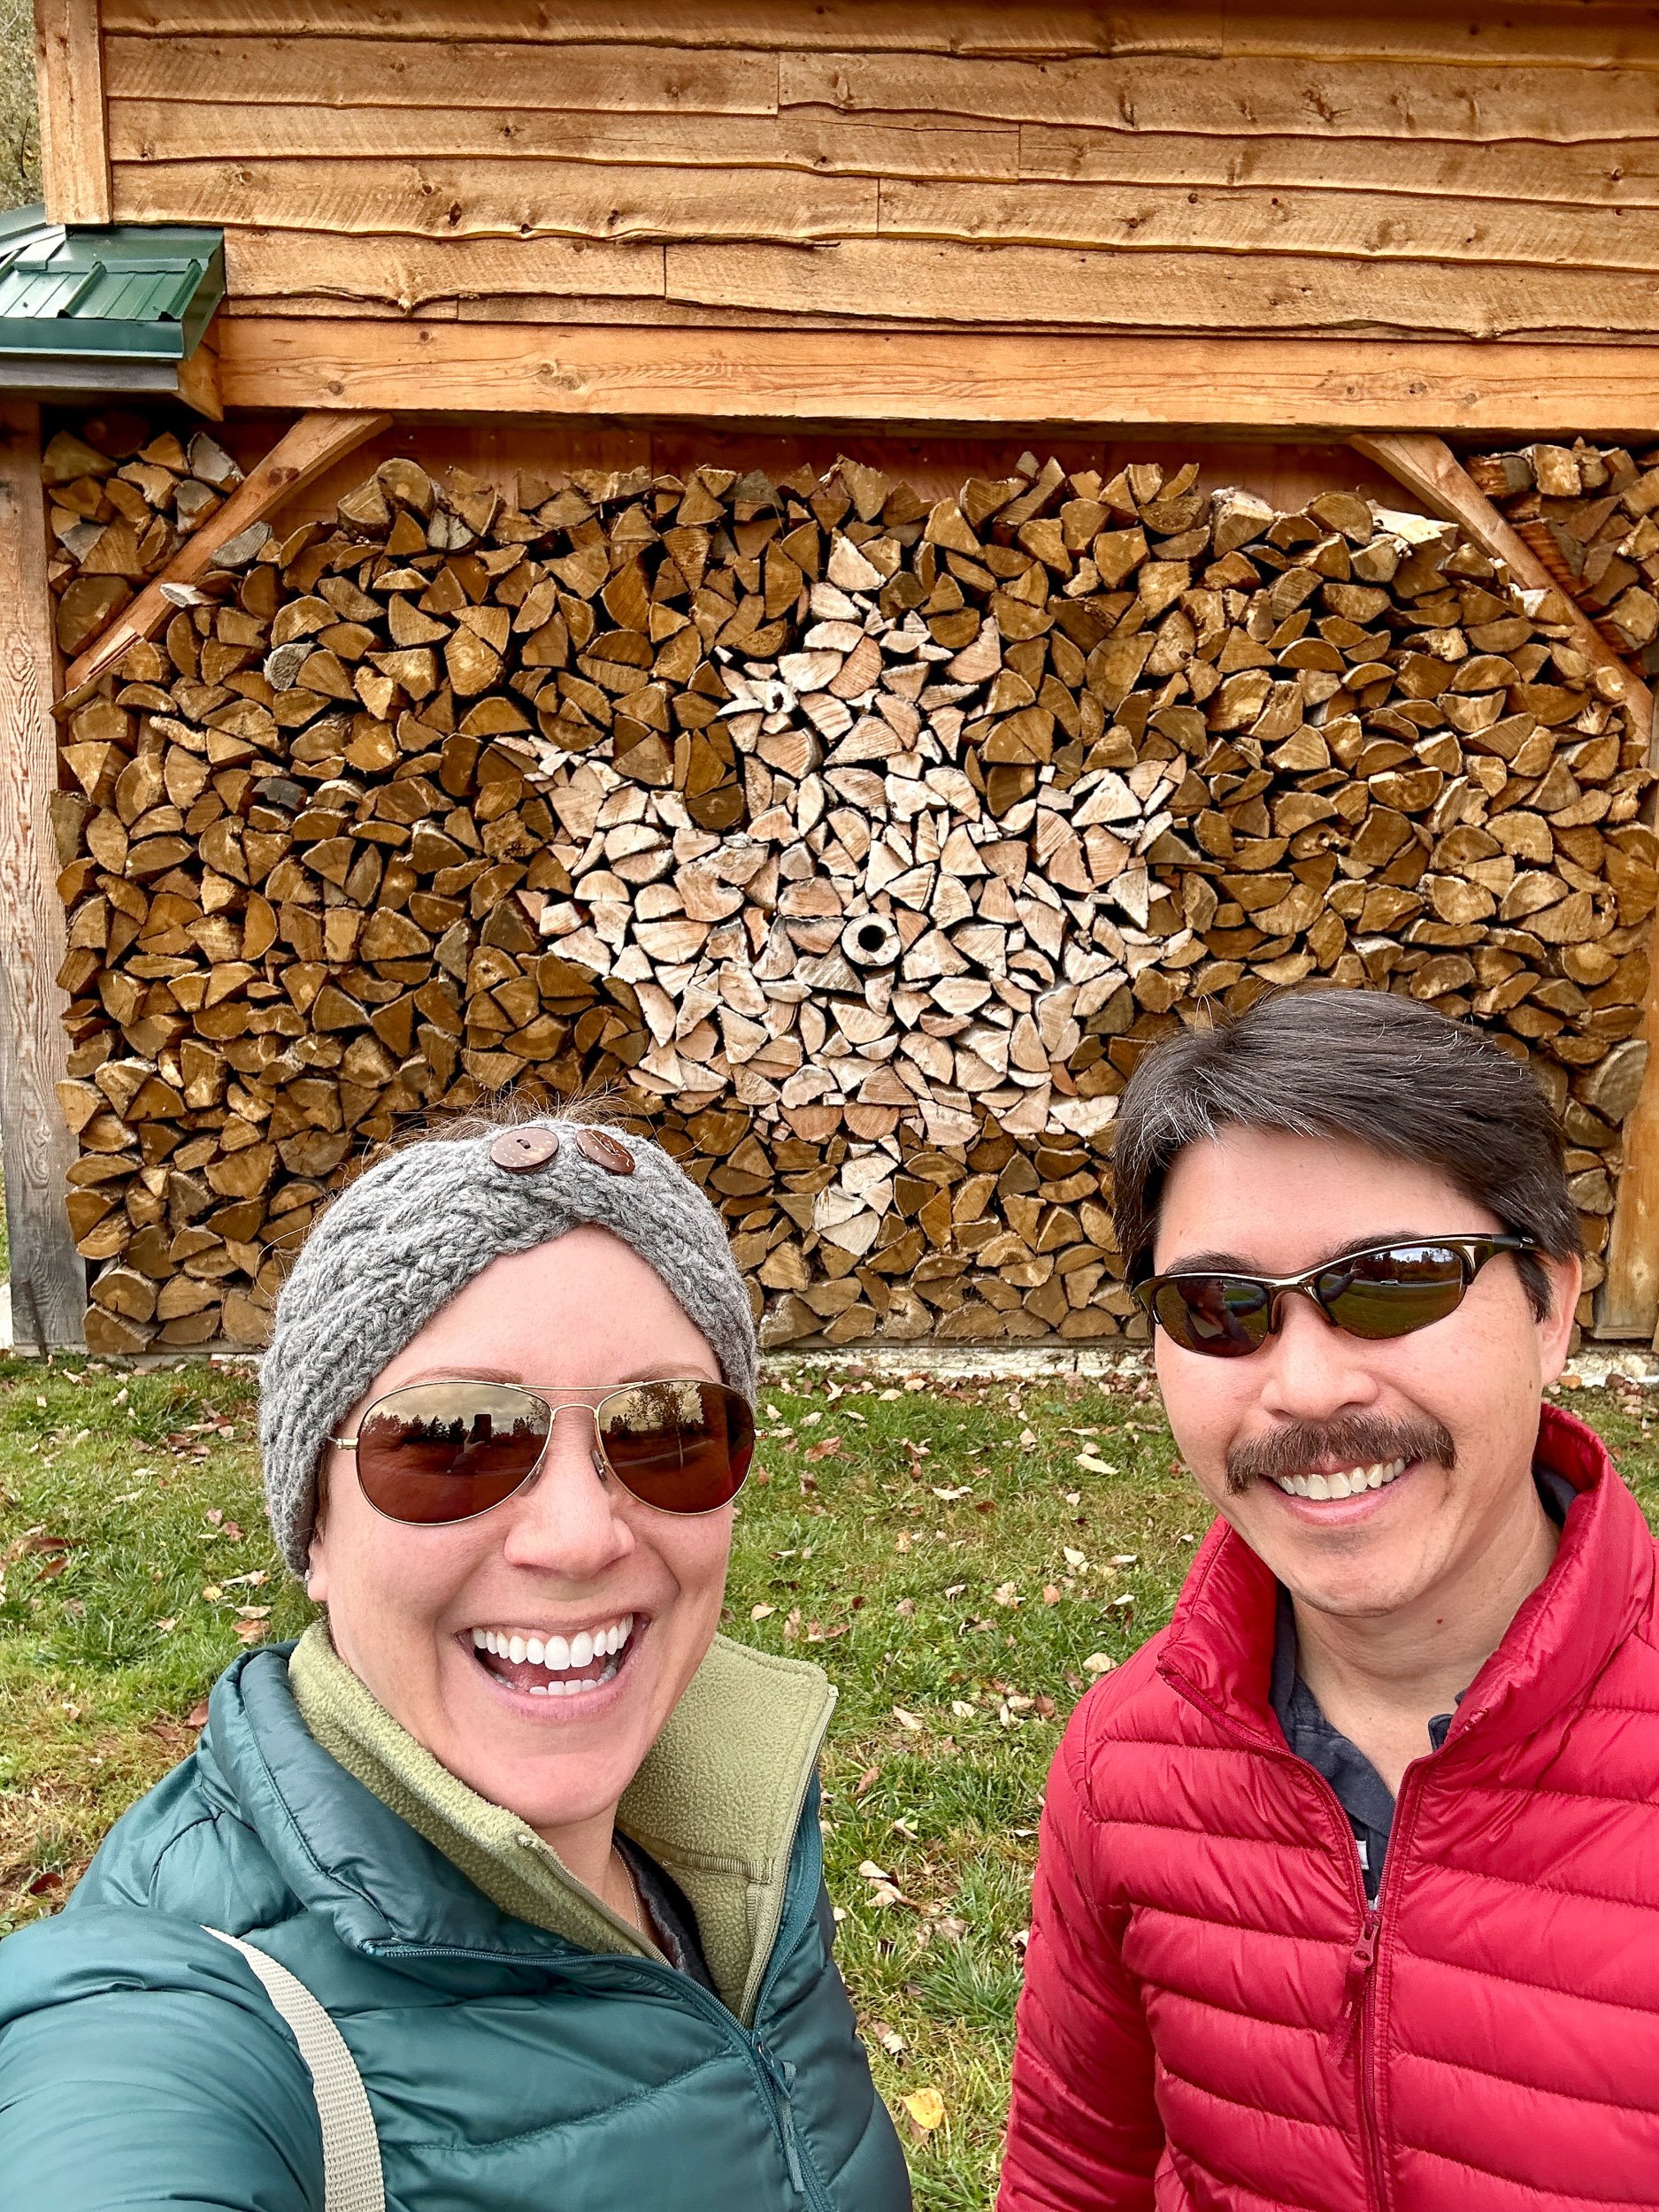 Rachelle and Pete standing in front of a pile of wood arranged to look like a maple leaf.